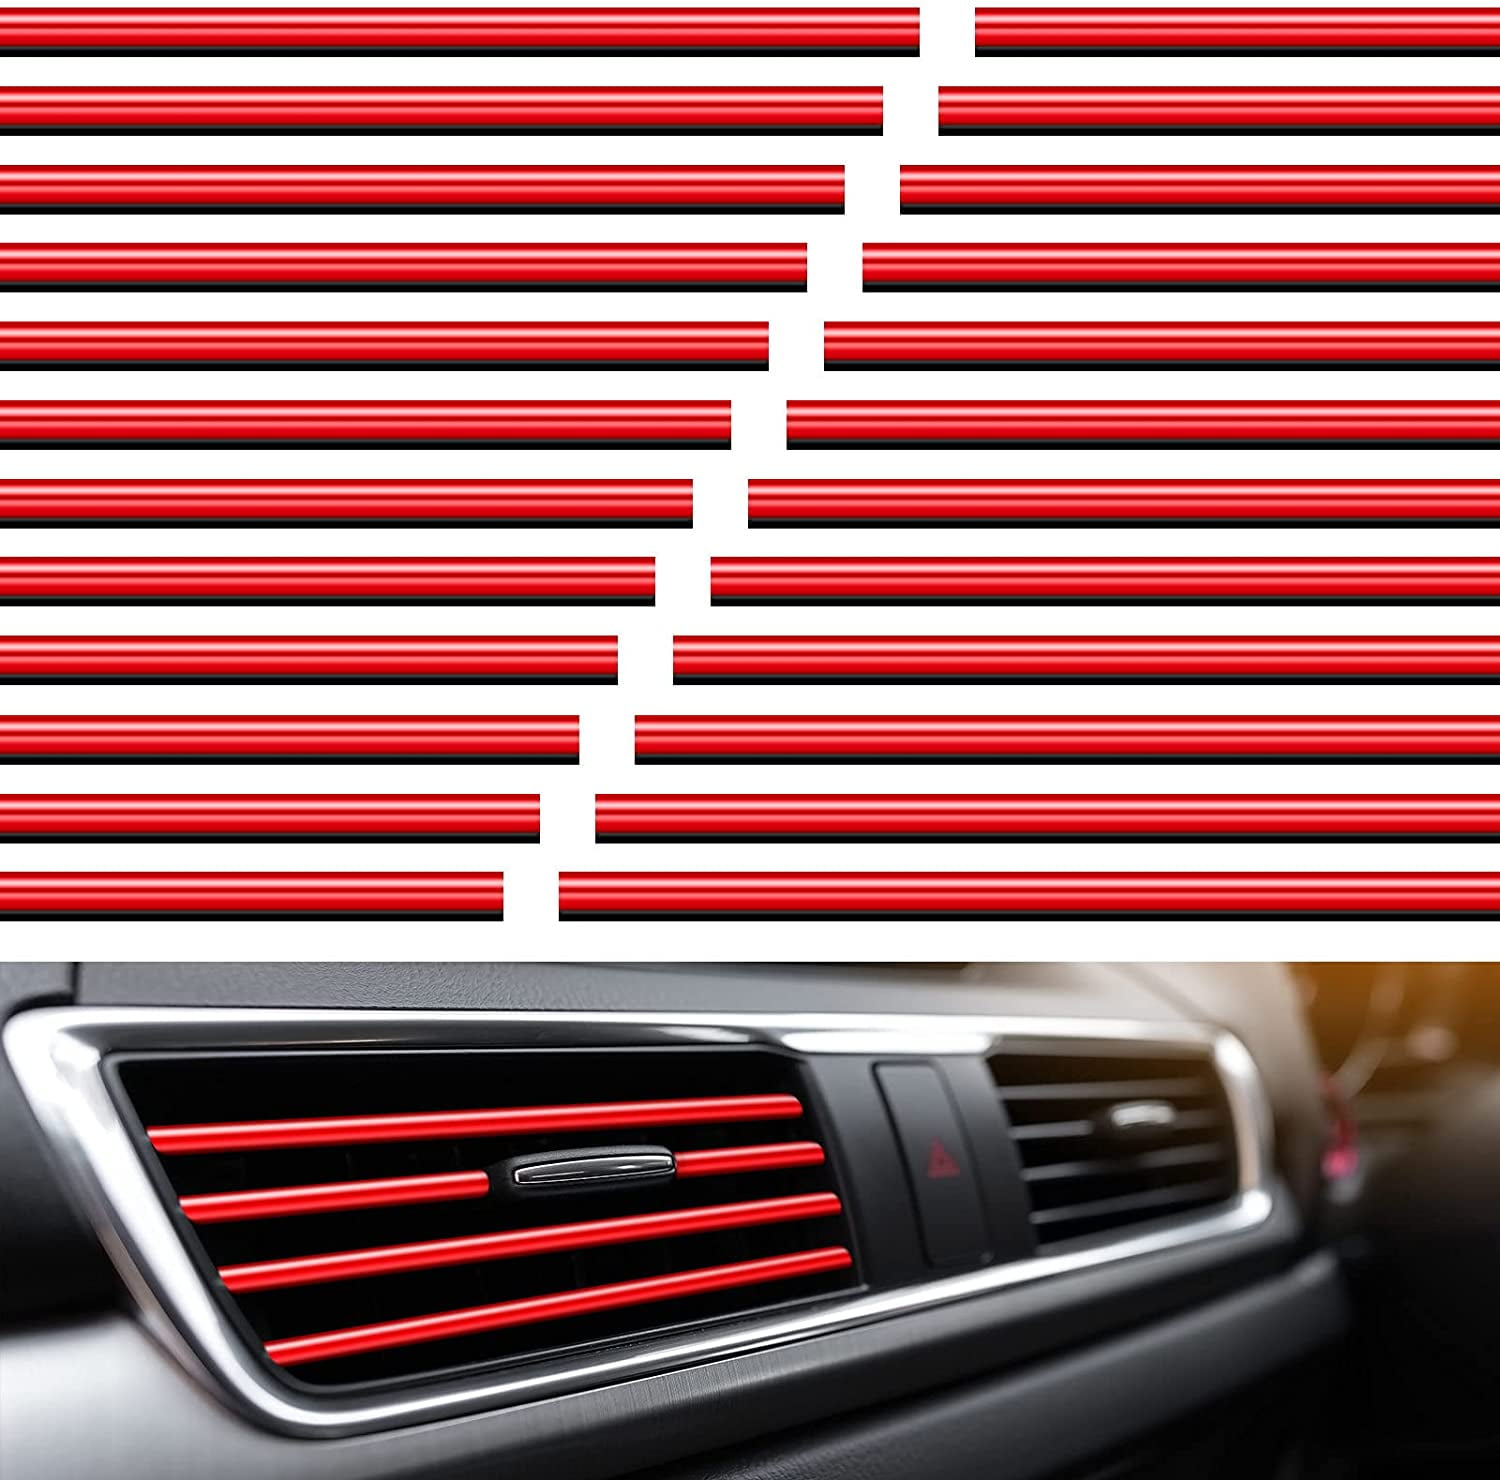 Red 20 Pieces Car Vent Outlet Trim Car Interior Moulding Trim Car Air Conditioner Vent Outlet Trim Chrome PVC Car Interior Trim Vent Outlet Trim Decoration Strip for All Straight Air Vent Outlet 